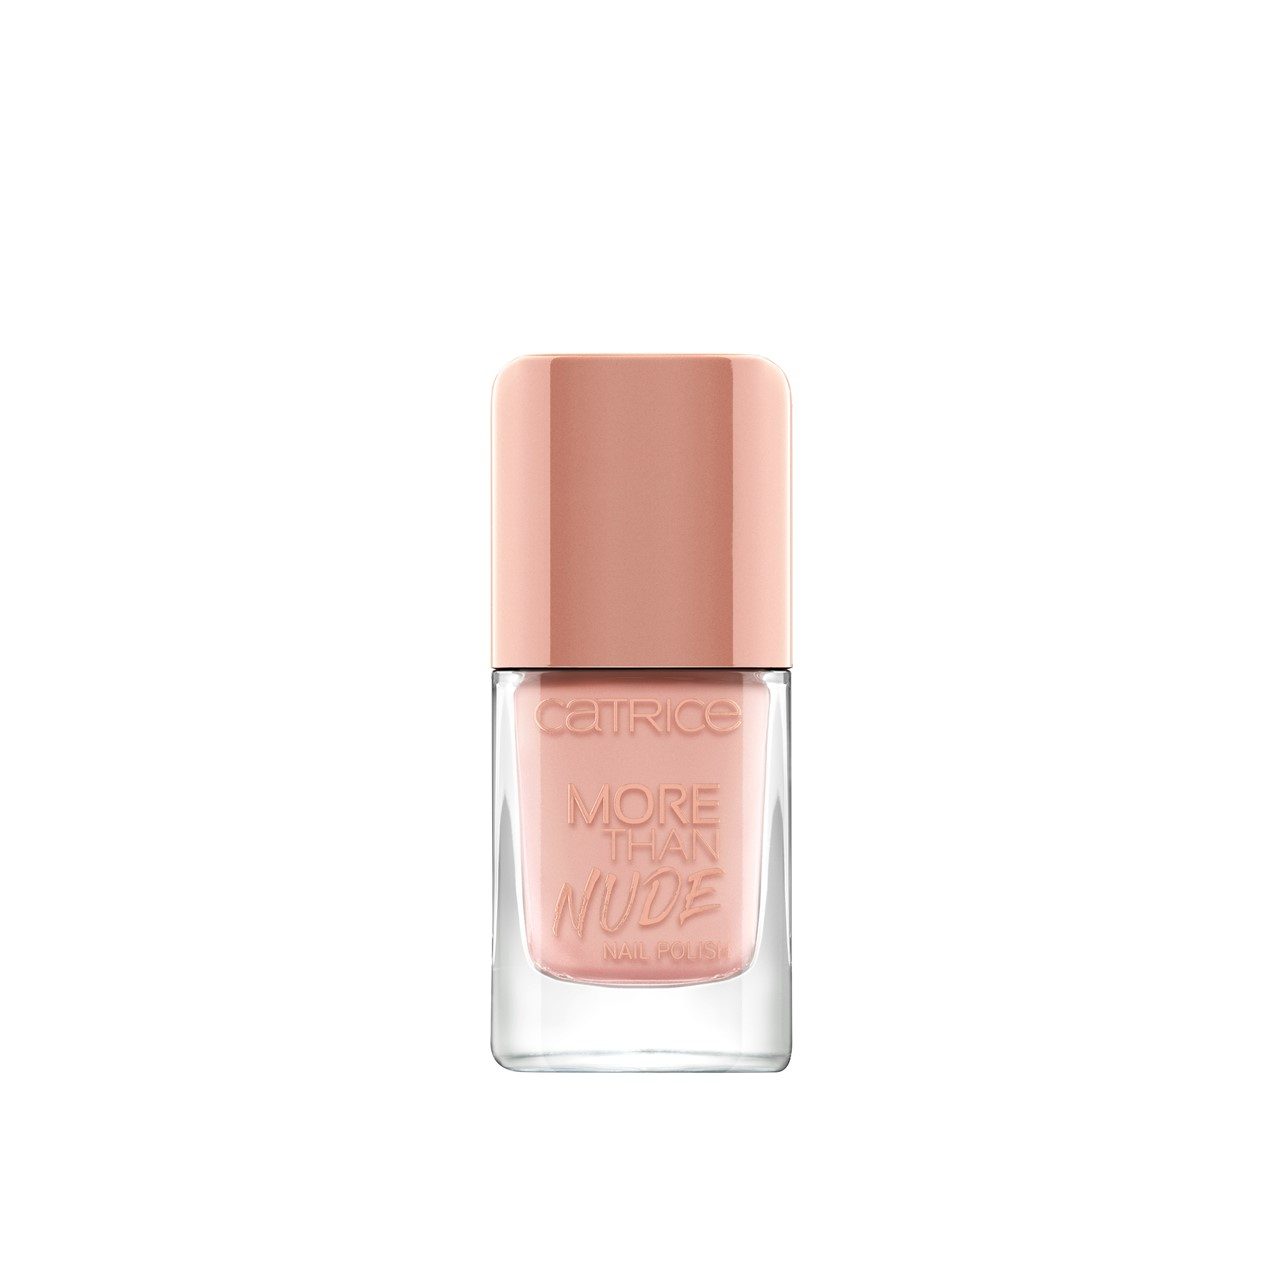 Catrice More Than Nude Nail Polish 07 Nudie Beautie 10.5ml (0.36fl oz)